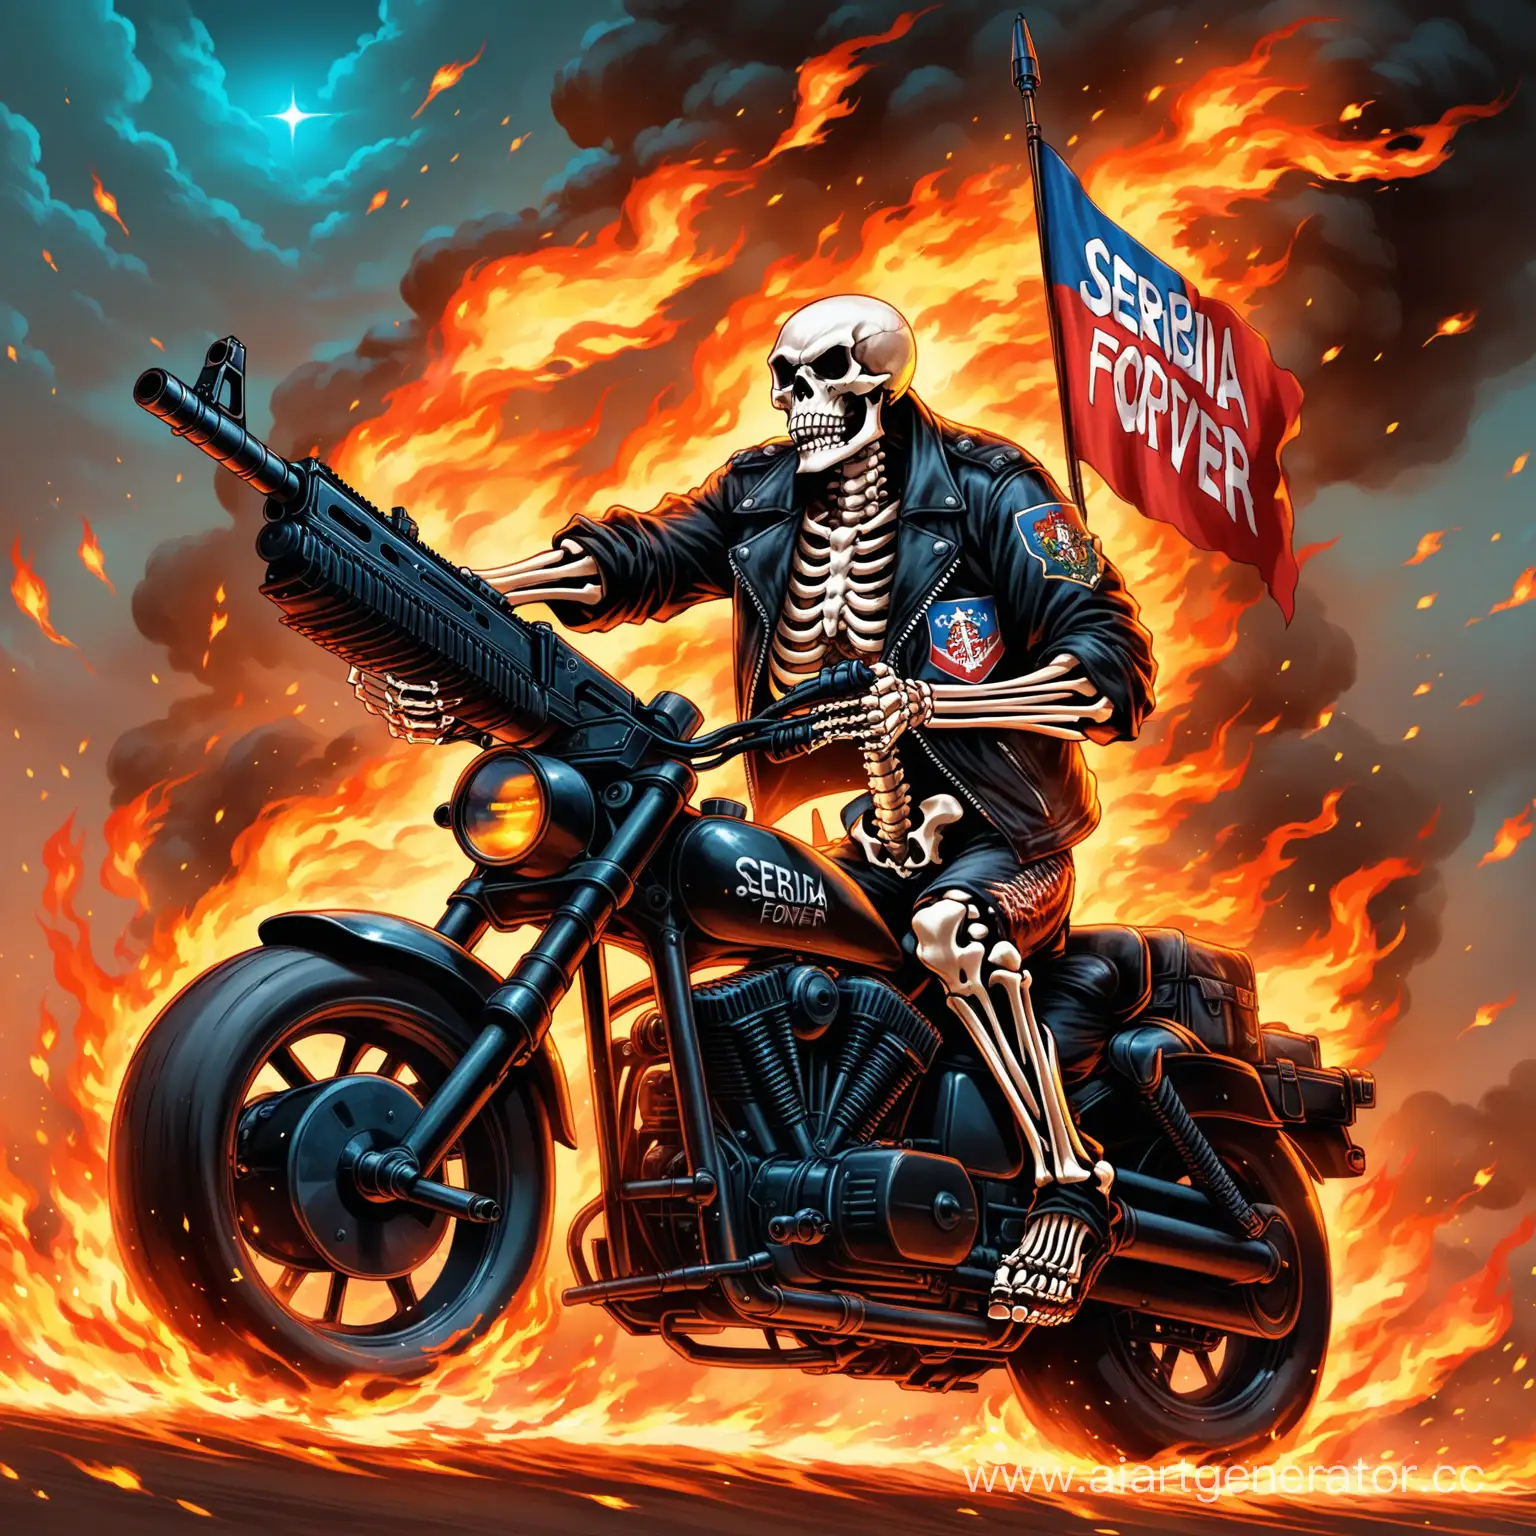 Fierce-Biker-Skeleton-with-Assault-Rifle-Amidst-Flames-SERBIA-FOREVER